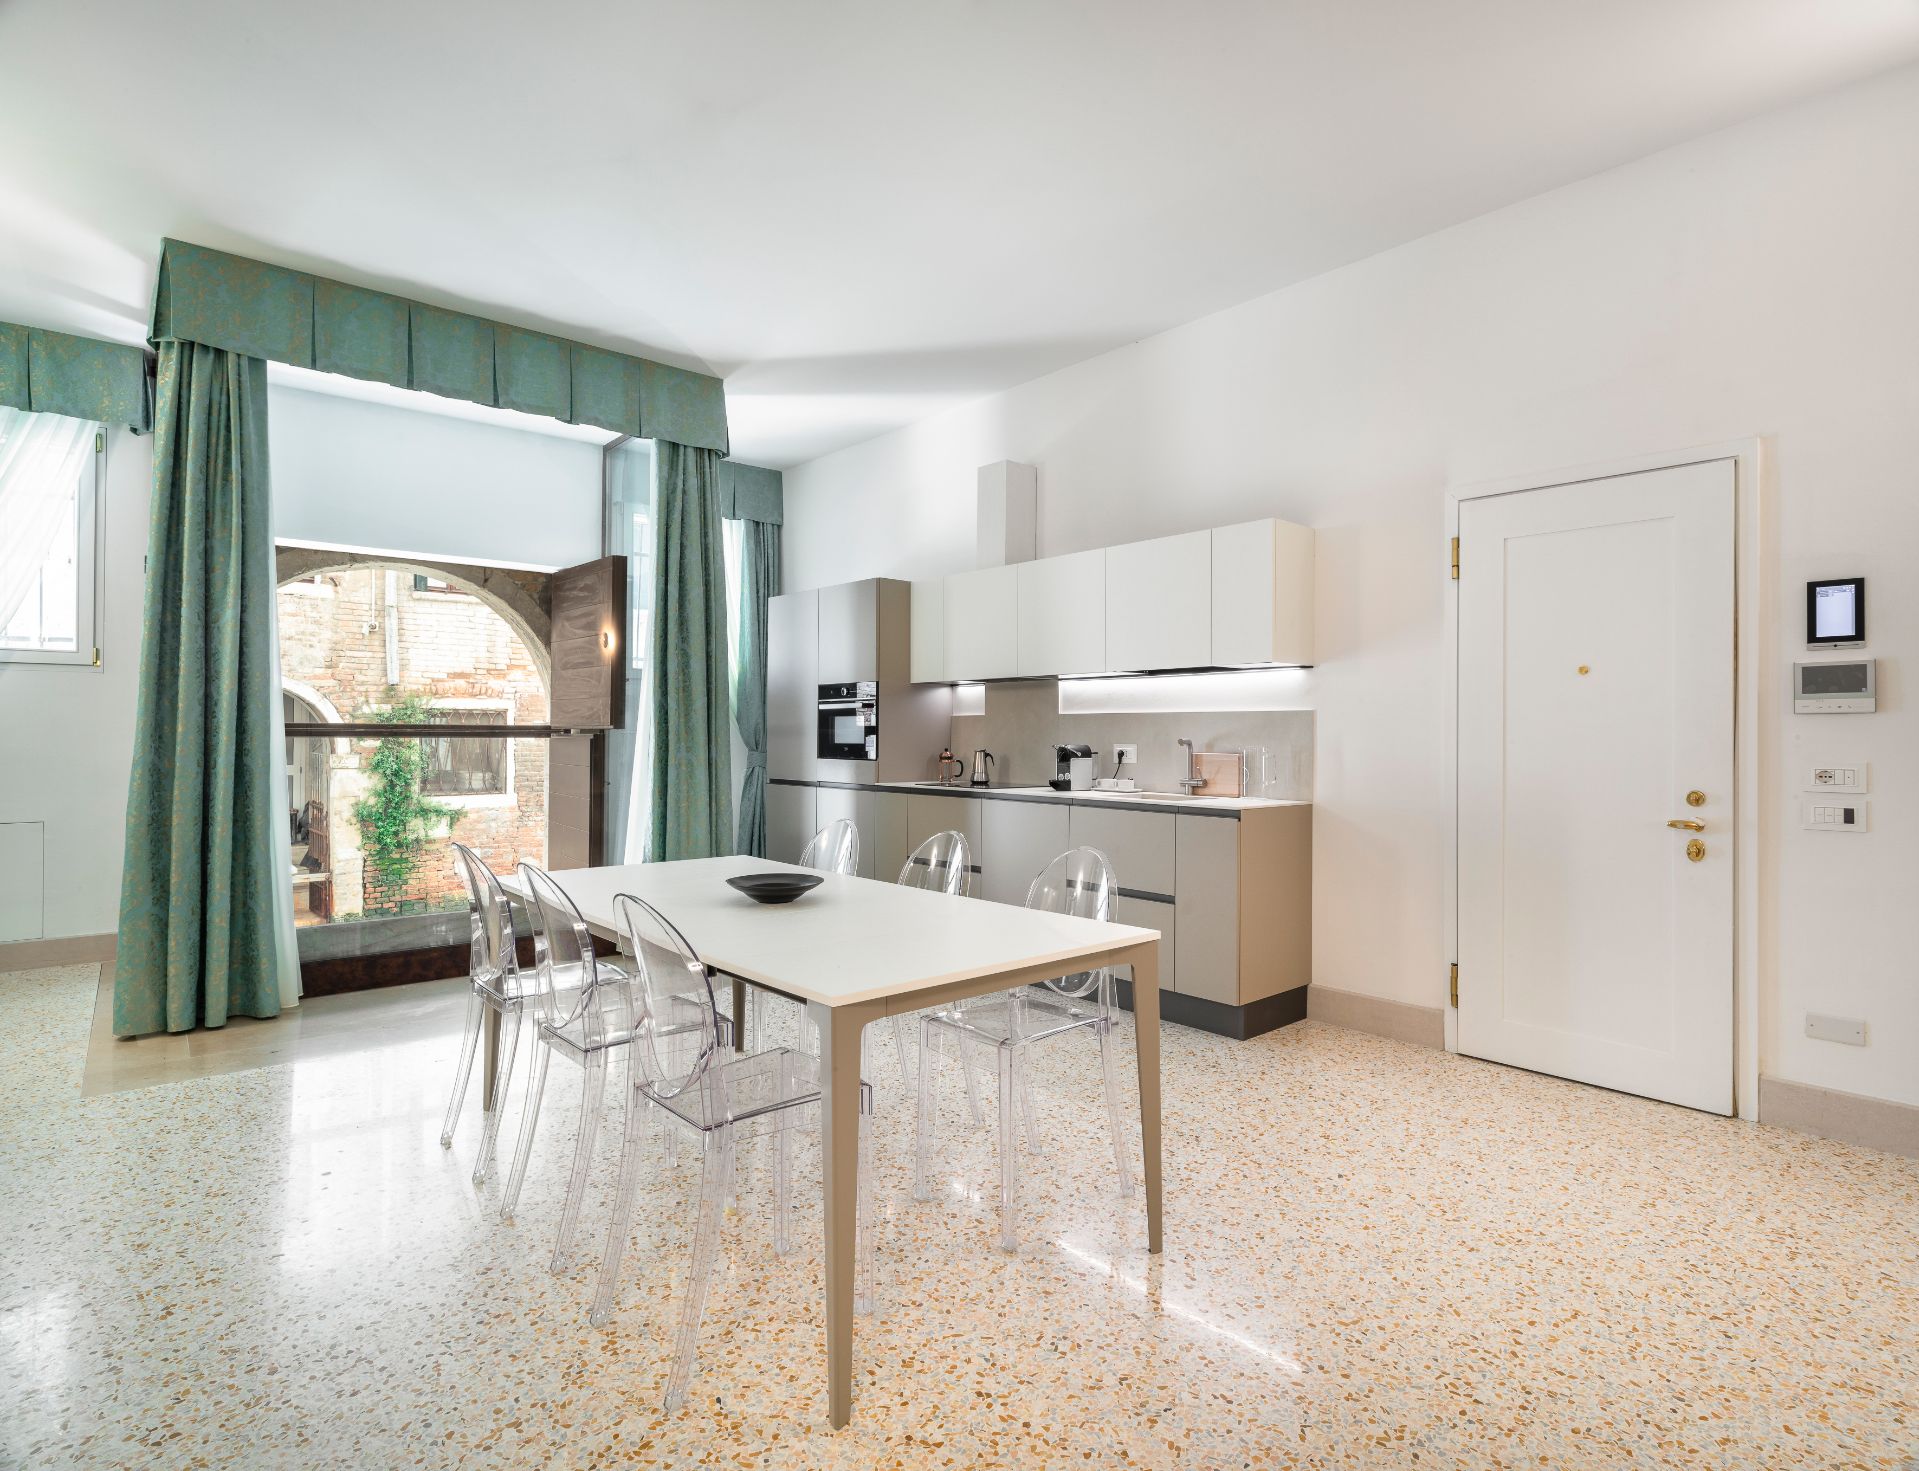 Torcello Palazzo Moro San Marco - a 2 bedroom apartment for sale in Venice